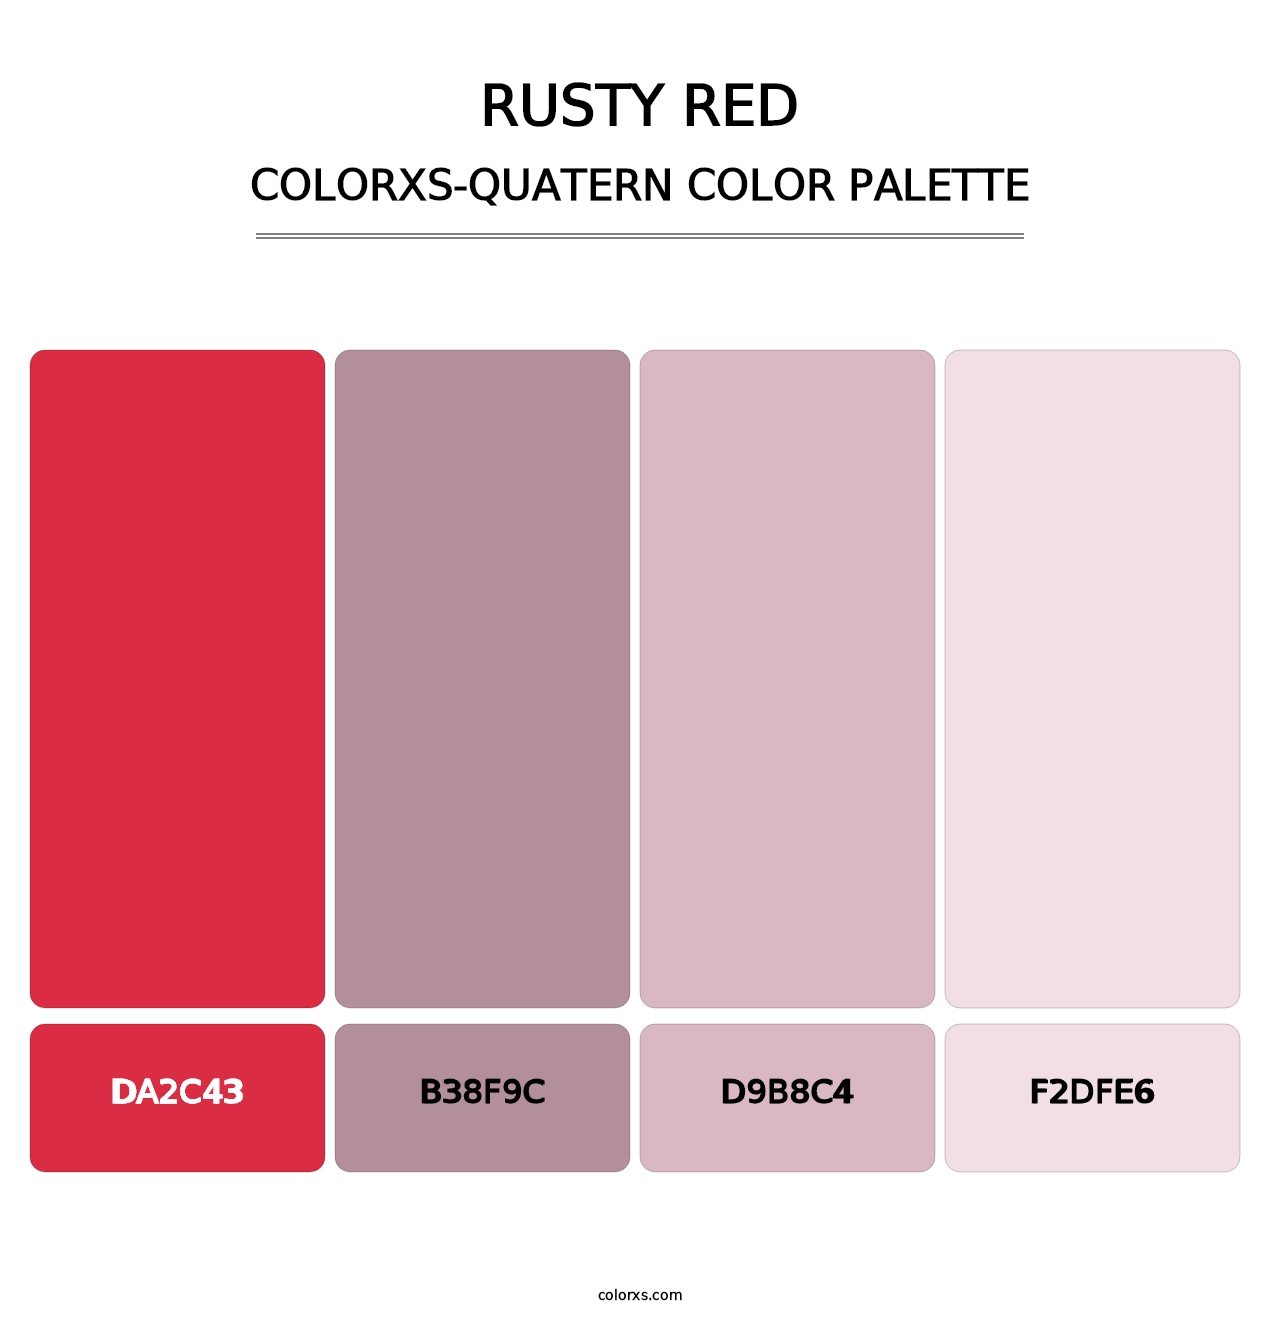 Rusty Red - Colorxs Quatern Palette